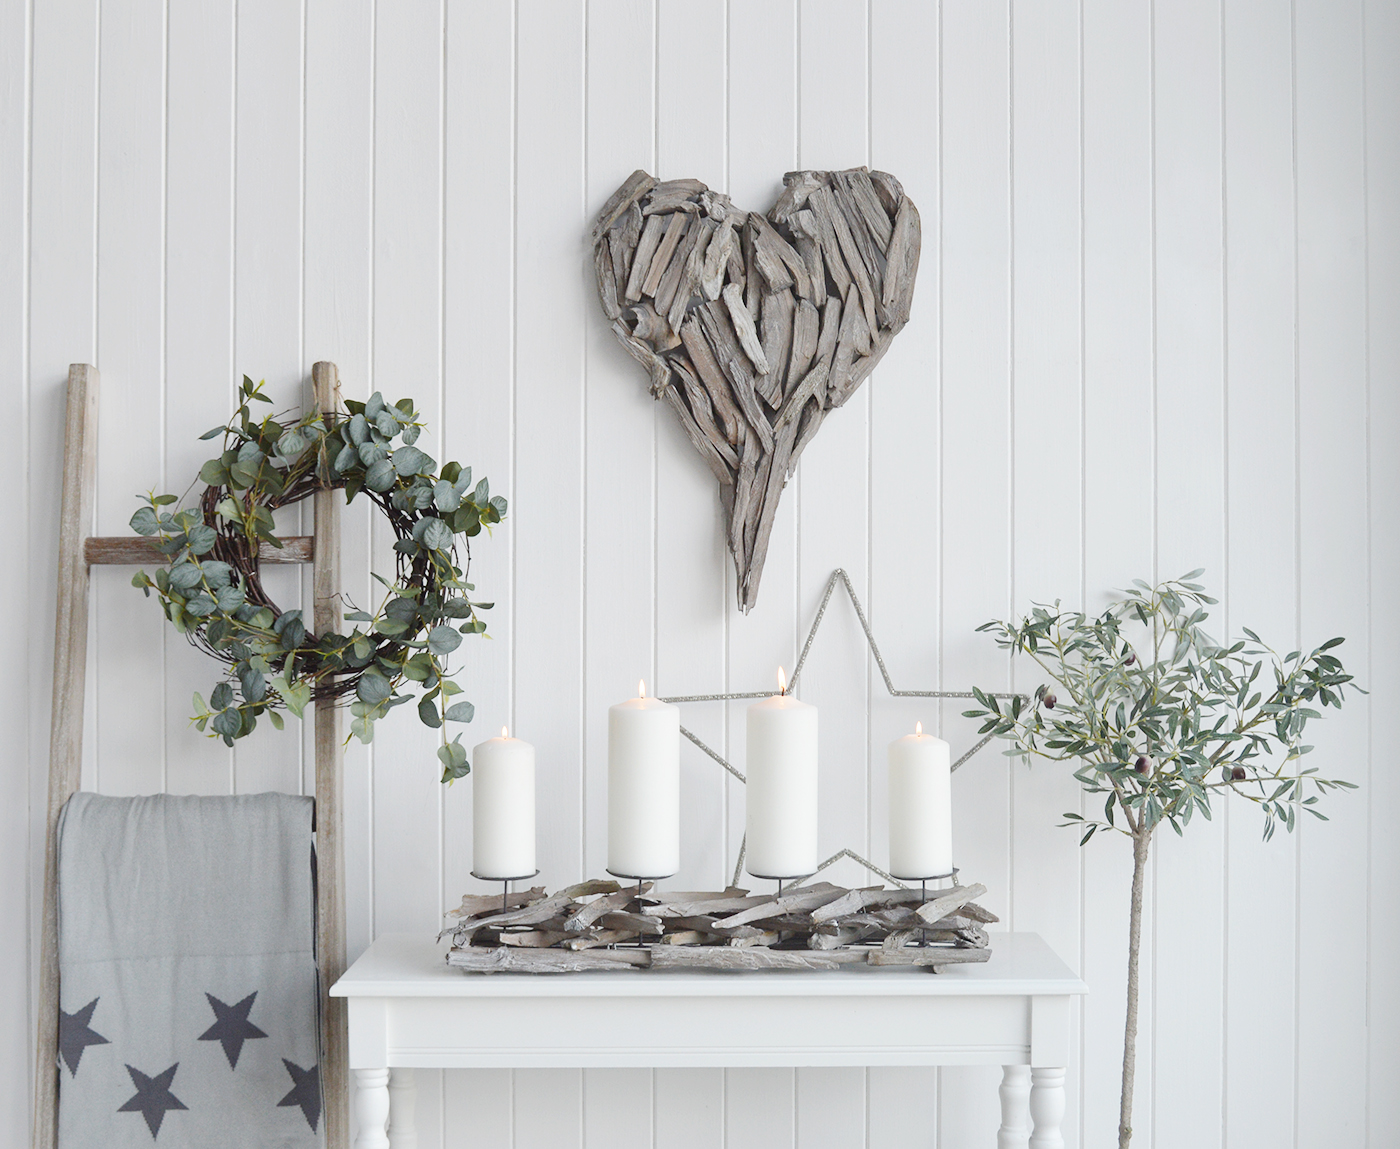 Driftwood home accessories and furniture in New England Style for country, coastal and modern farmhouse homes and interiors